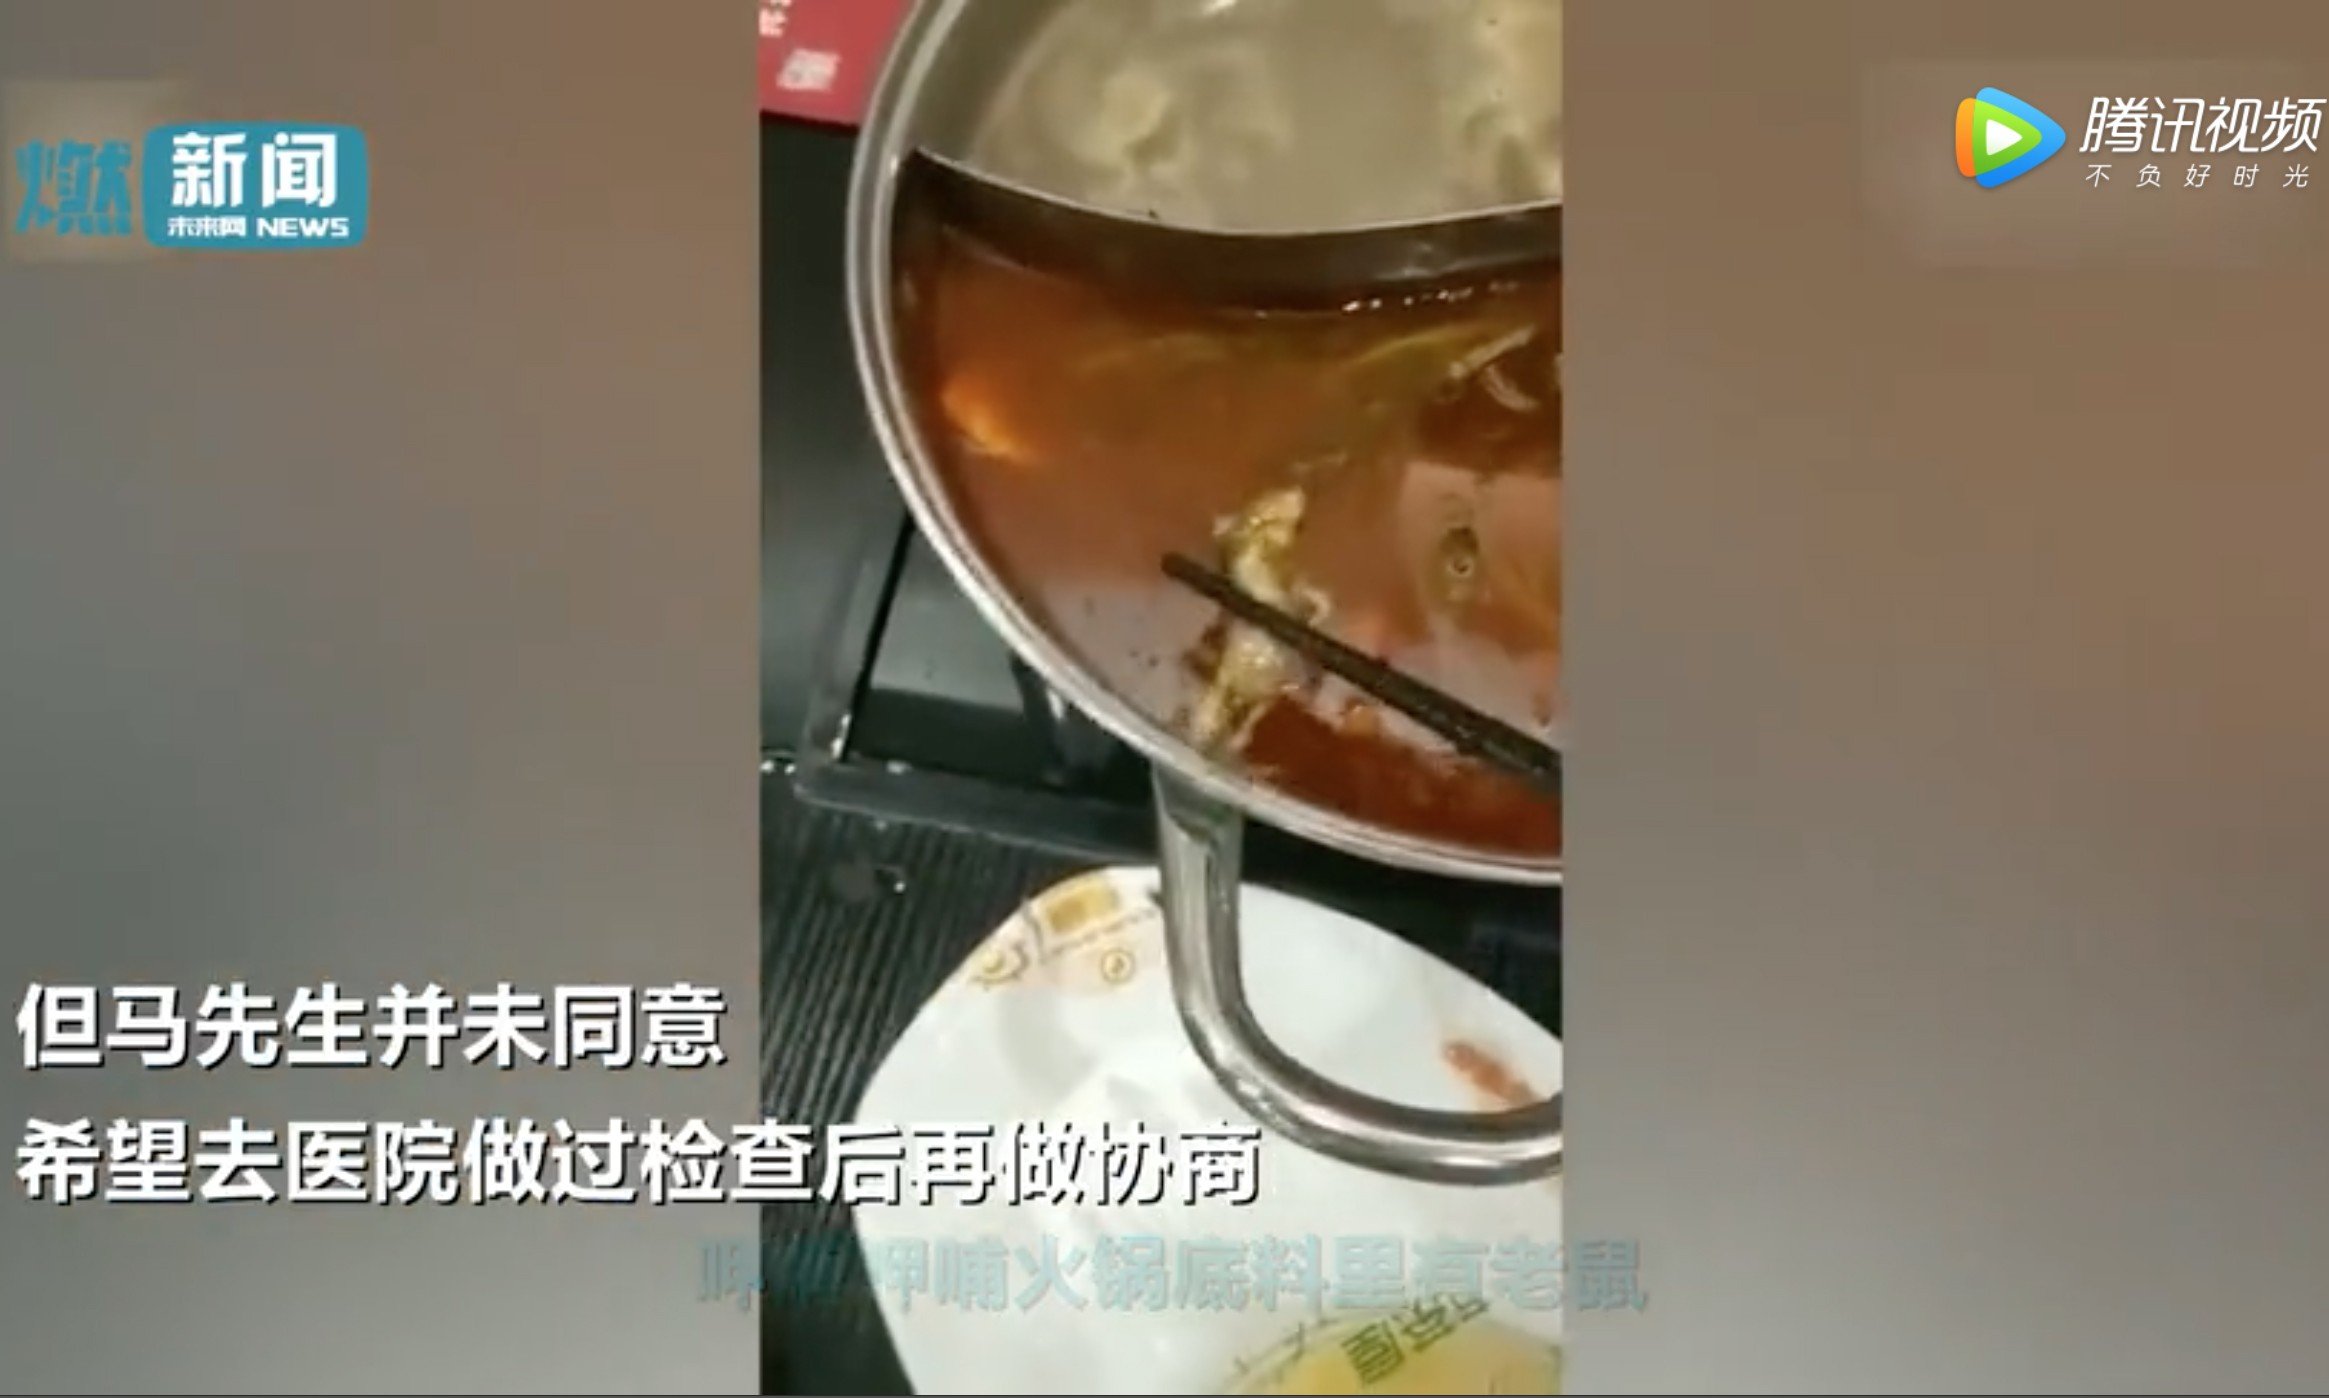 Screen grab of a video showing a dead rat found in a diner's pot in a hotpot shop in Weifang, Shandong province, China. Photo: Guancha.cn